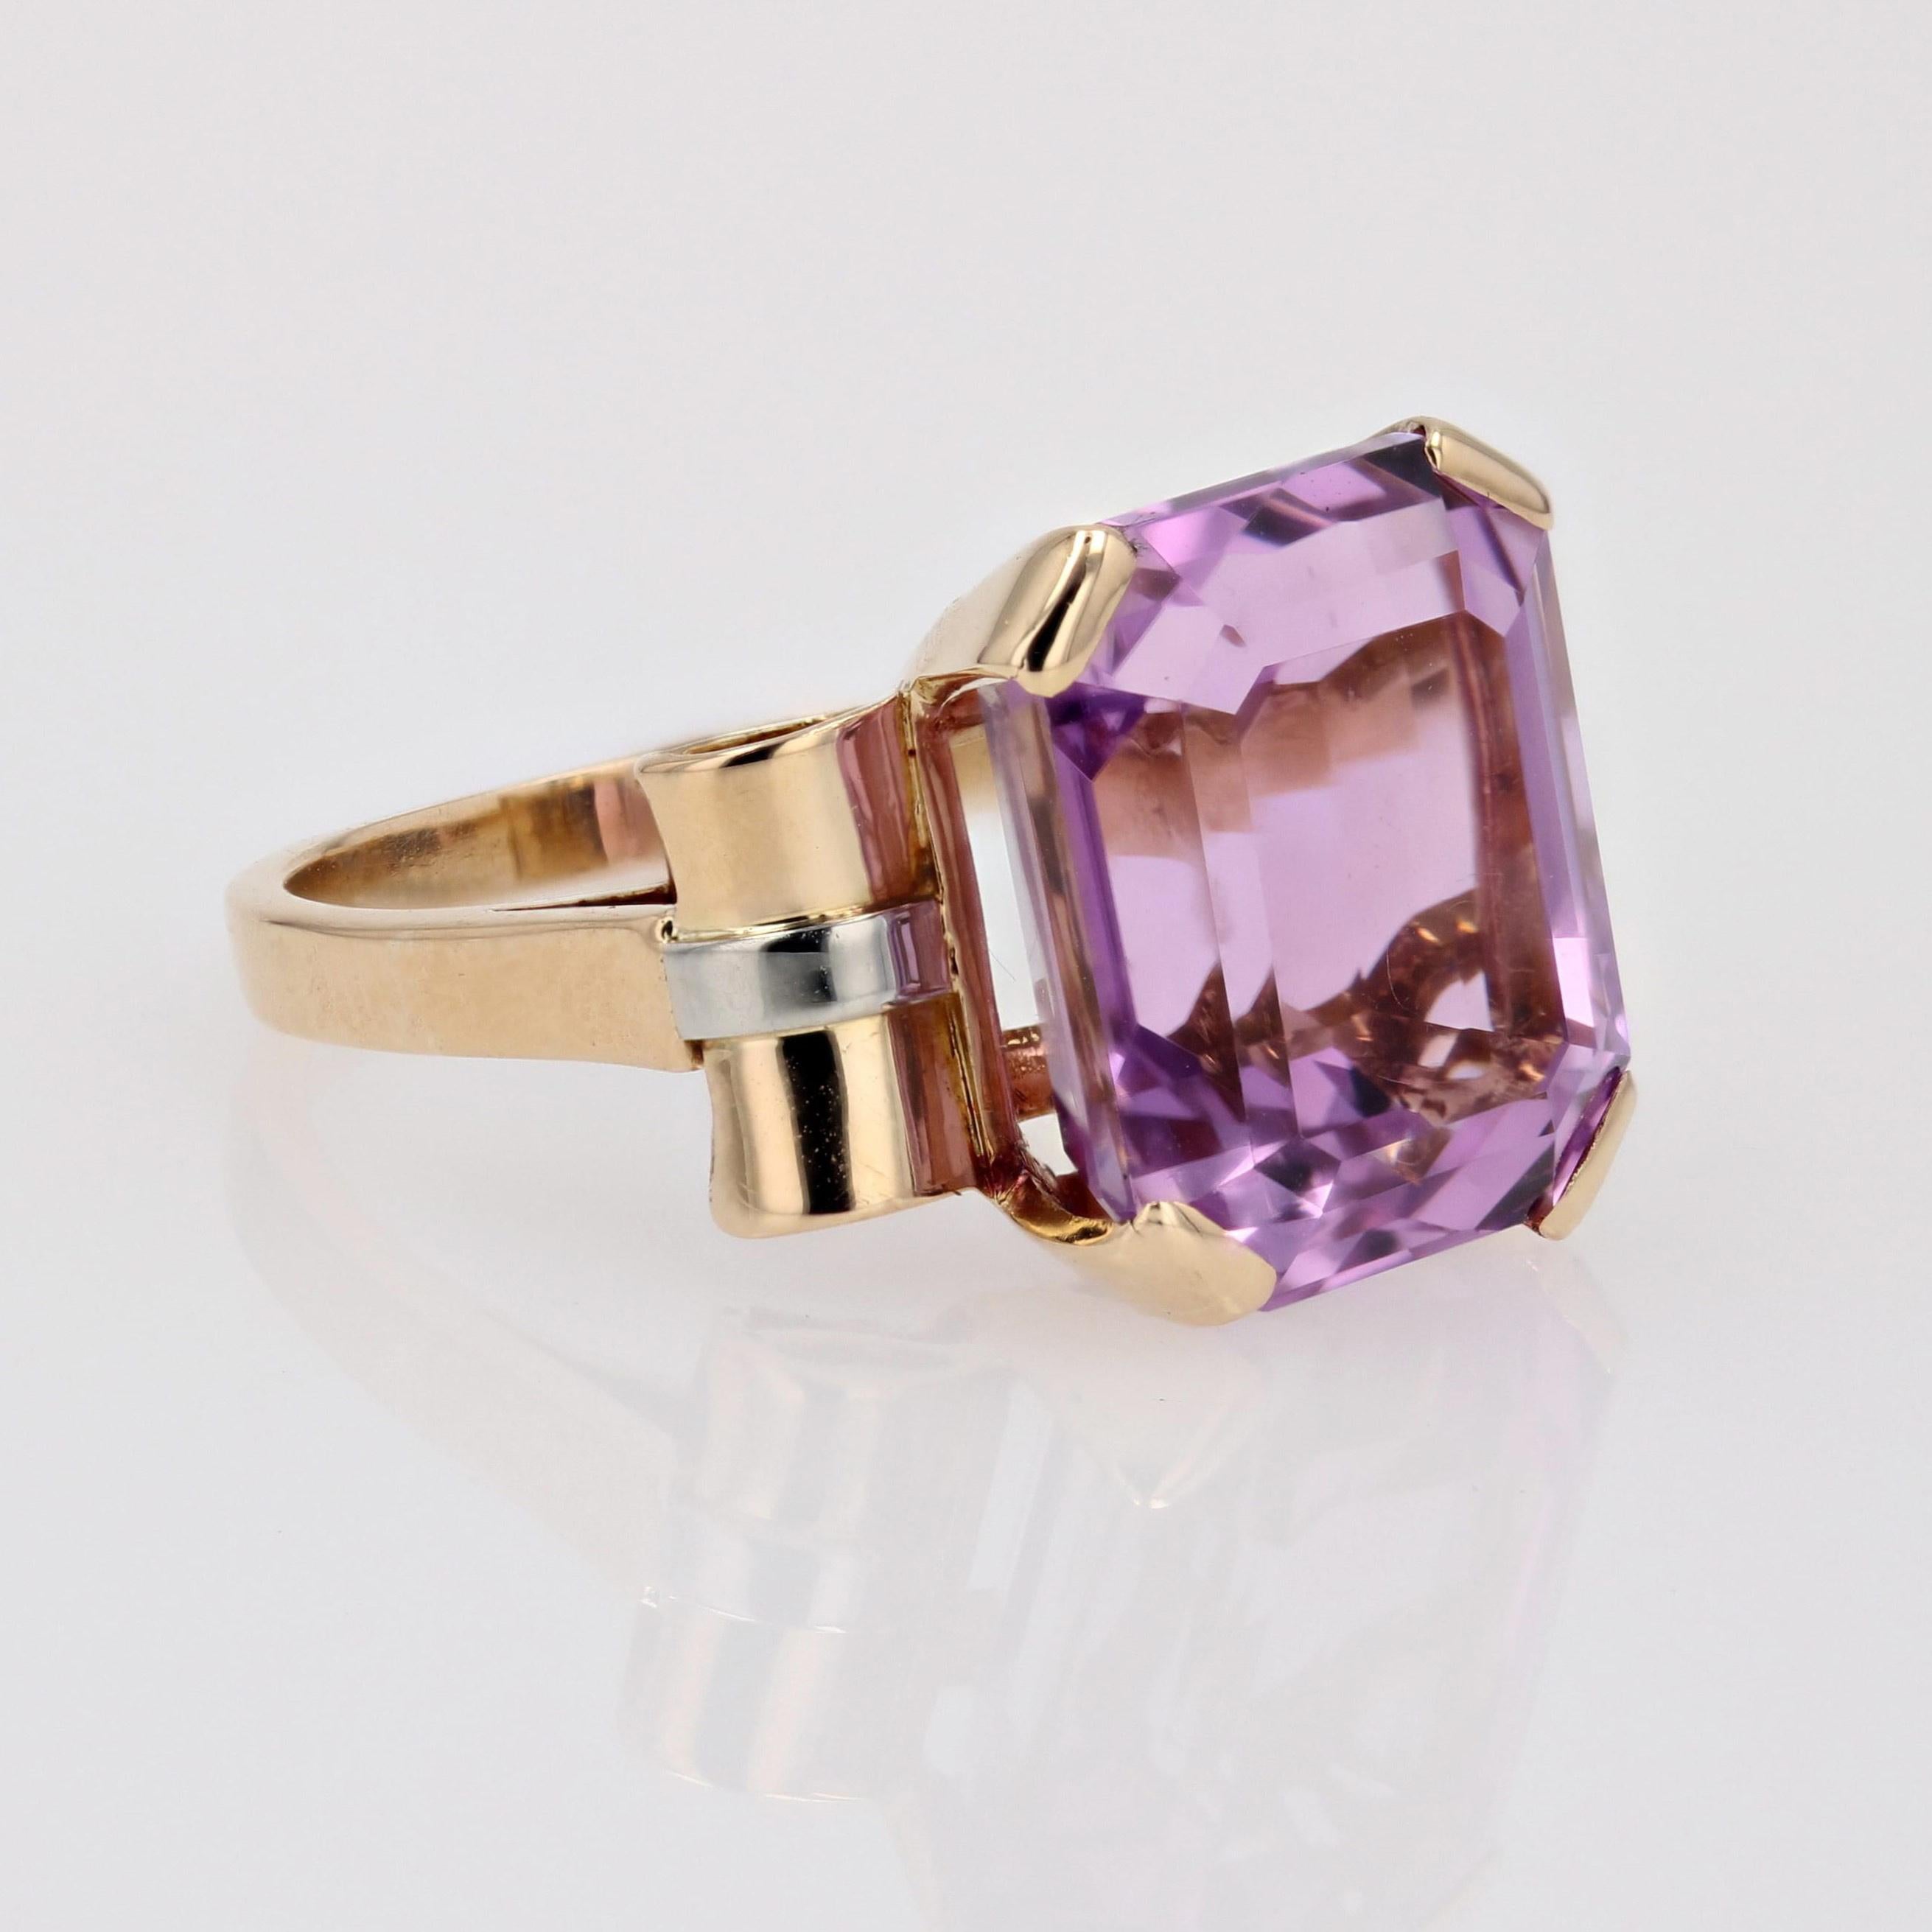 French Retro 1950s 11.29 Carats Kunzite 18 Karat Yellow Gold Cocktail Ring For Sale 5